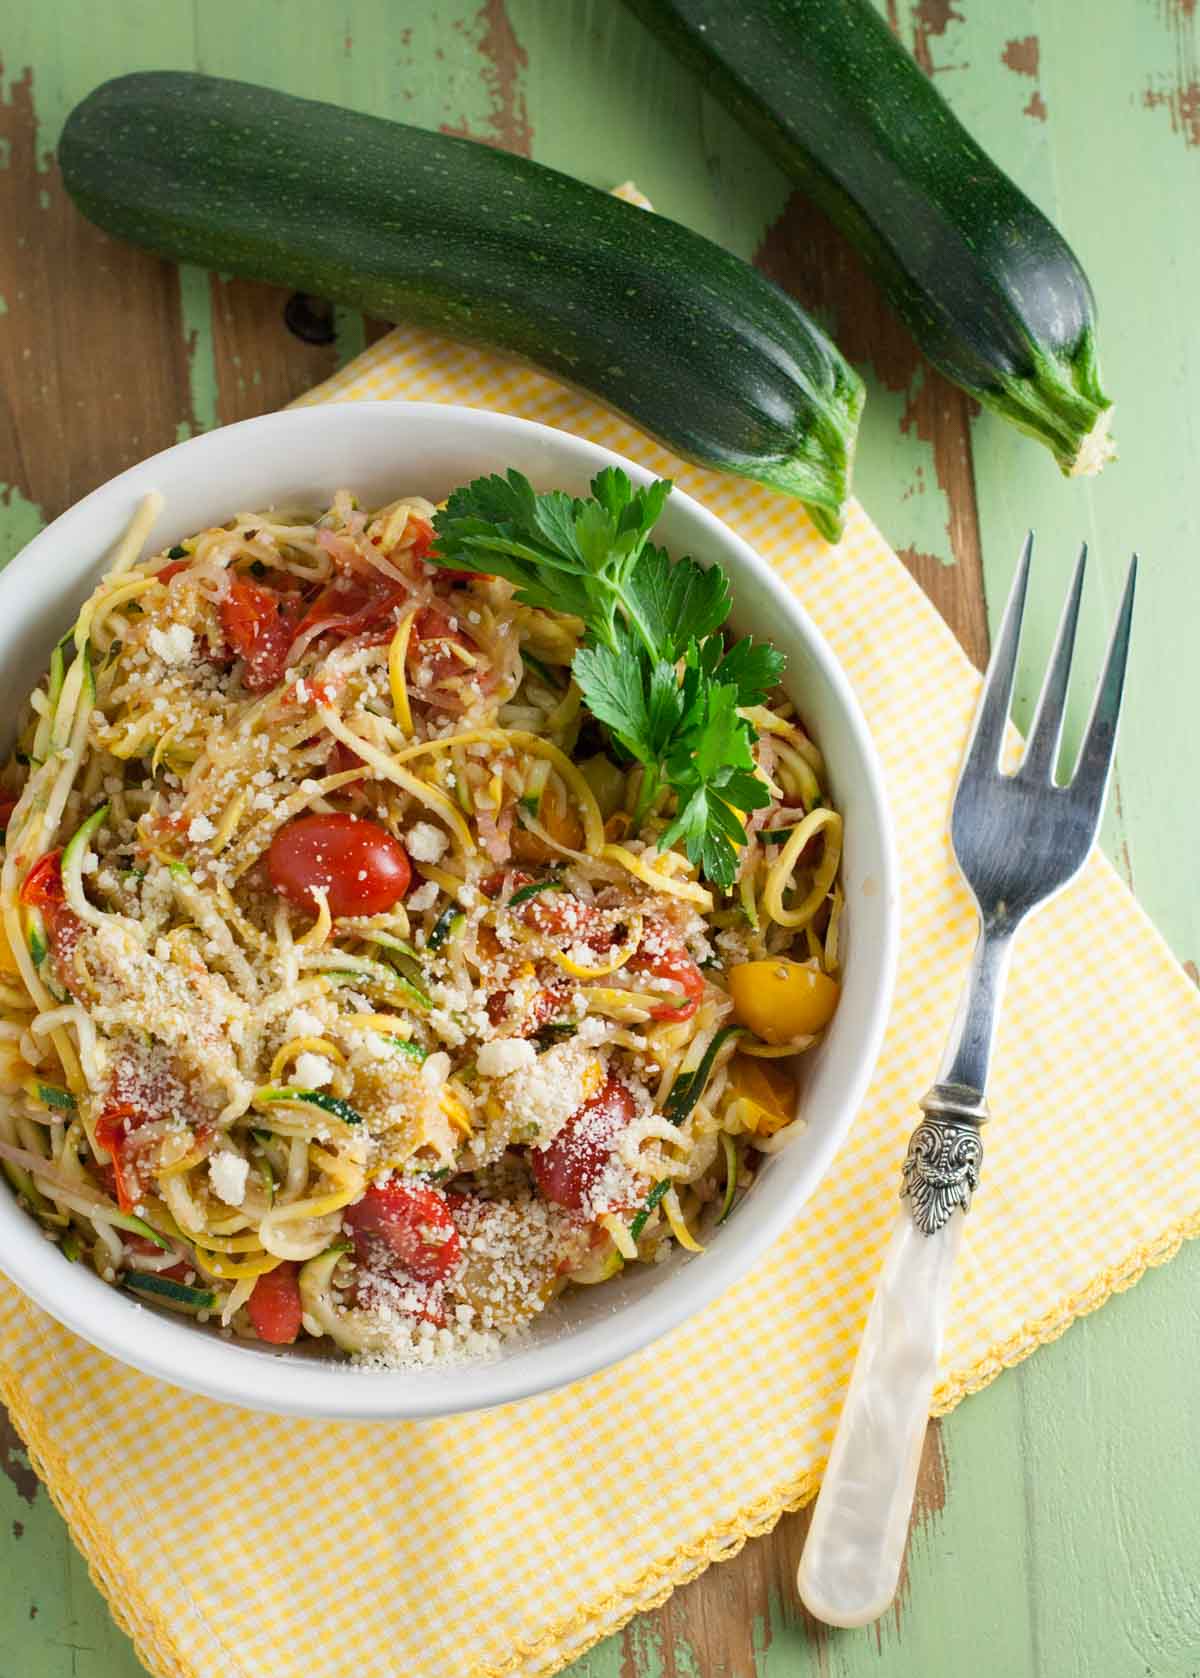 Zucchini Noodles with White Wine Sauce | WorldofPastabilities.com | Healthy and delicious zucchini and squash noodles make any meal colorful! as a main course or side dish - you will be amazed how a shape can transform a veggie! Even the kids raved!